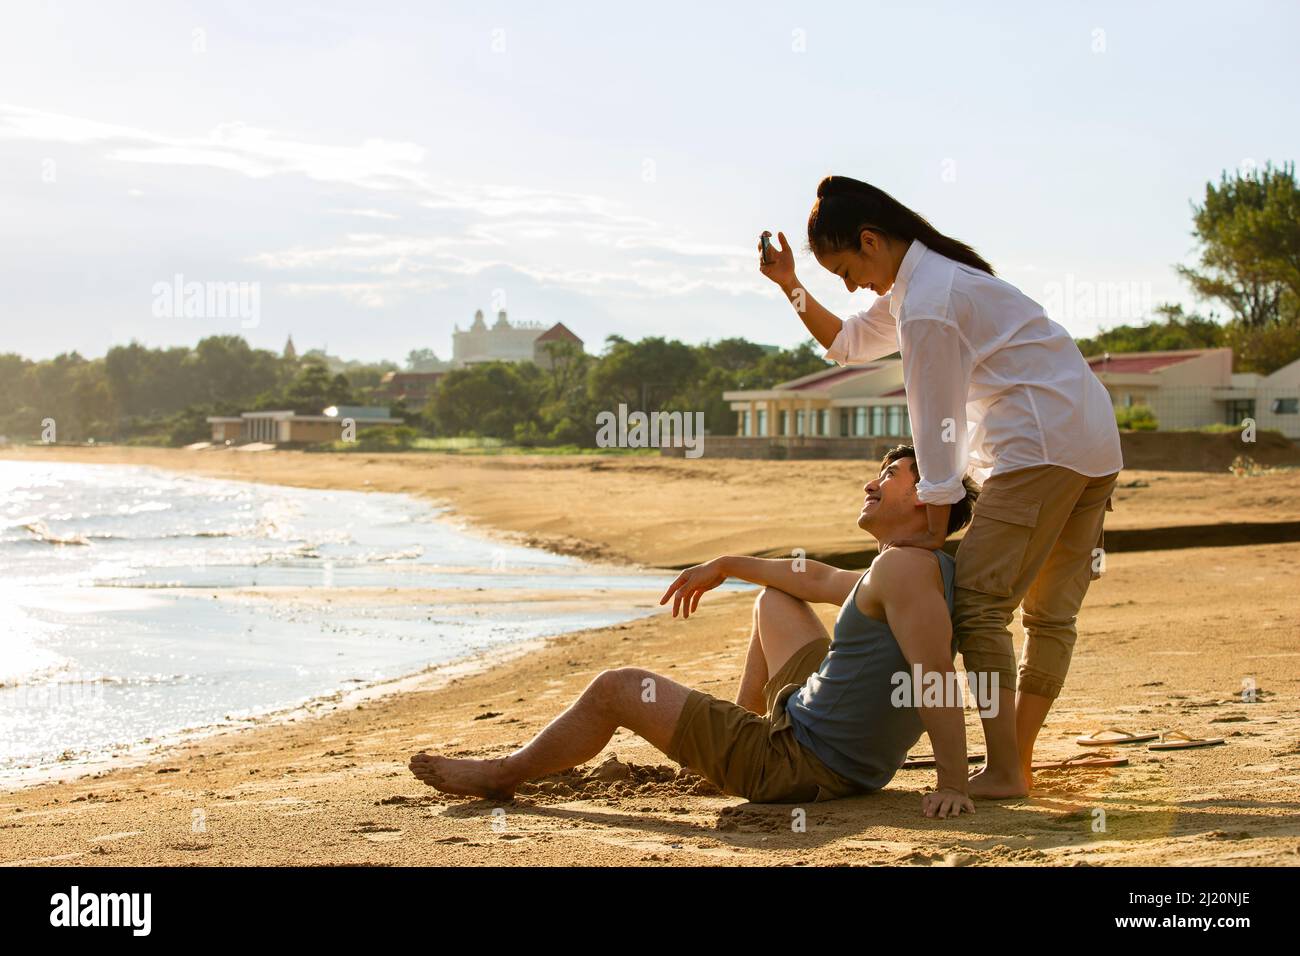 A young couple taking pictures on a summer beach - stock photo Stock Photo